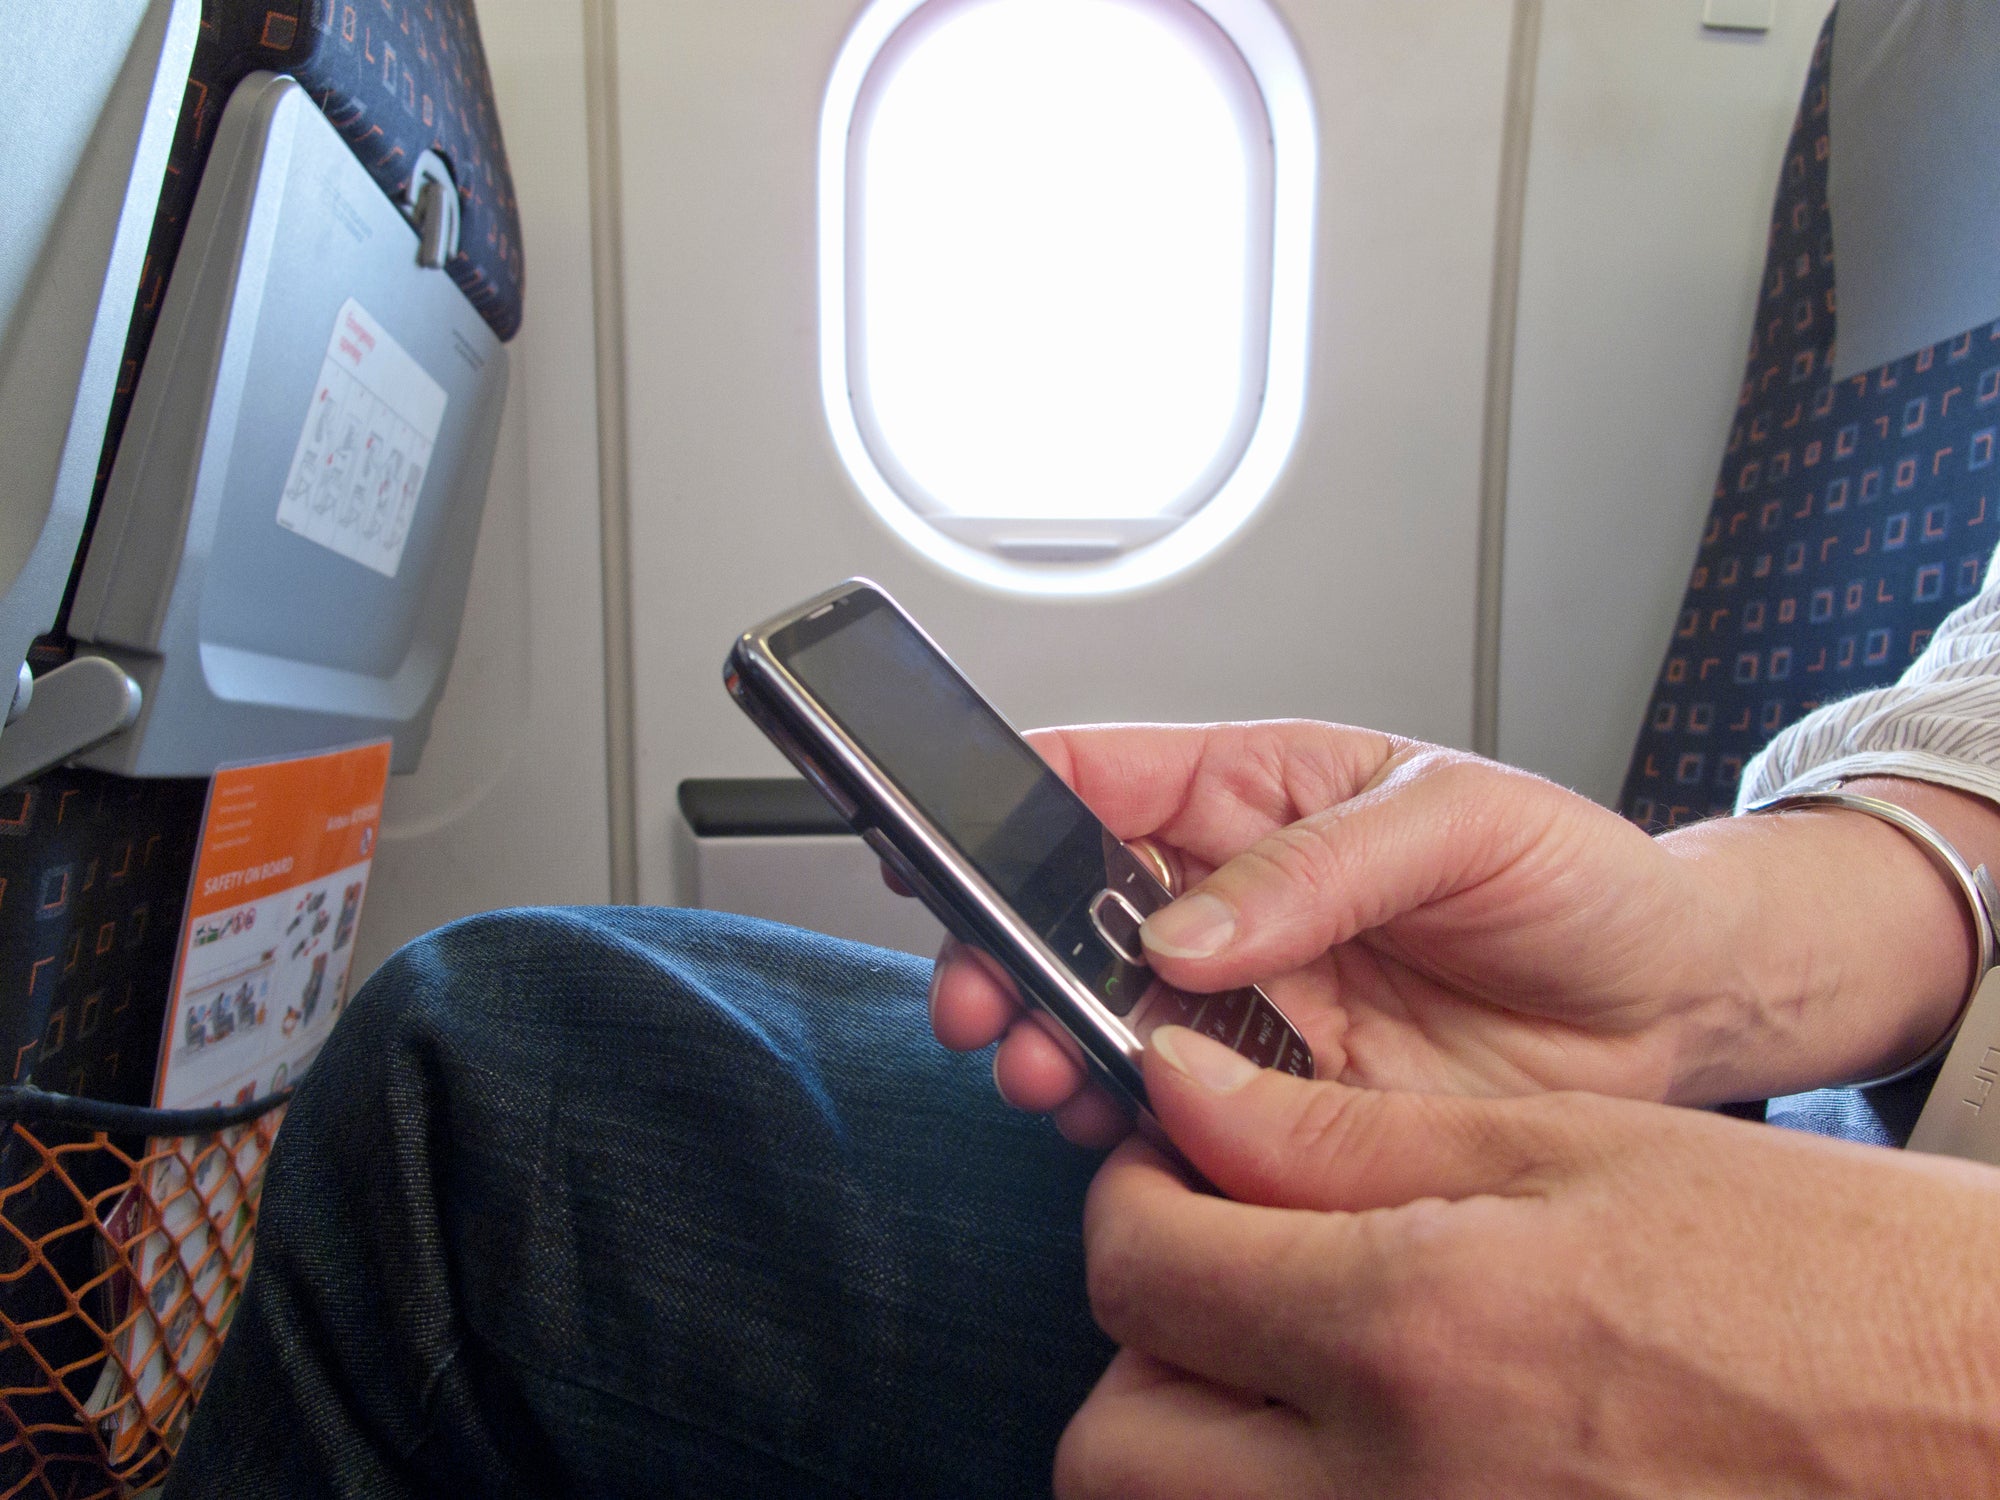 A person using a phone on a plane